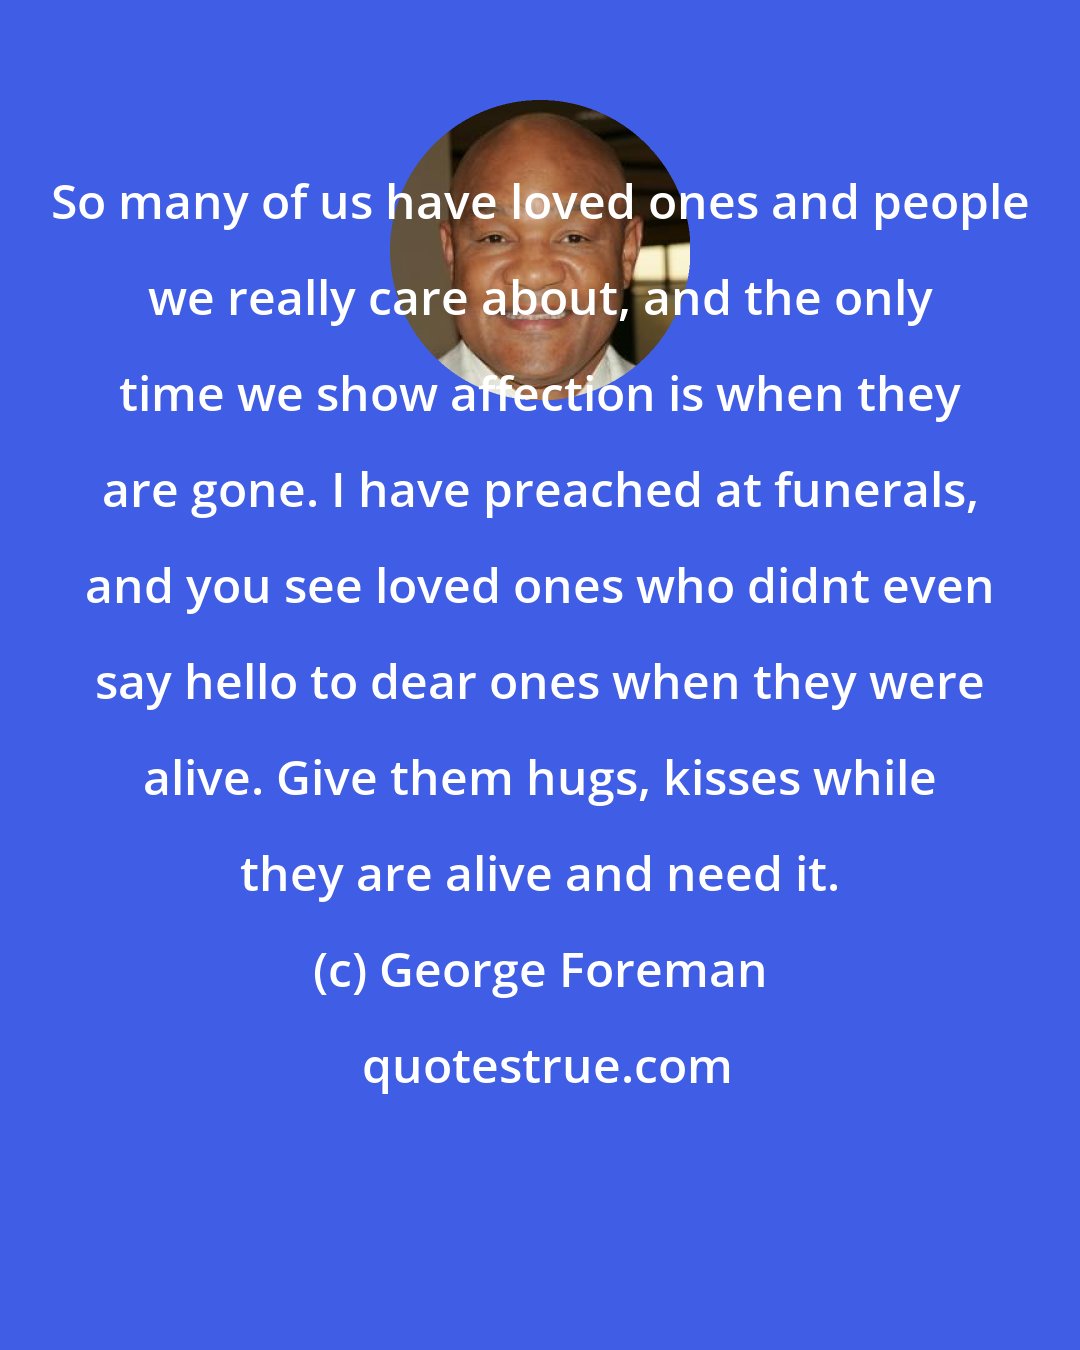 George Foreman: So many of us have loved ones and people we really care about, and the only time we show affection is when they are gone. I have preached at funerals, and you see loved ones who didnt even say hello to dear ones when they were alive. Give them hugs, kisses while they are alive and need it.